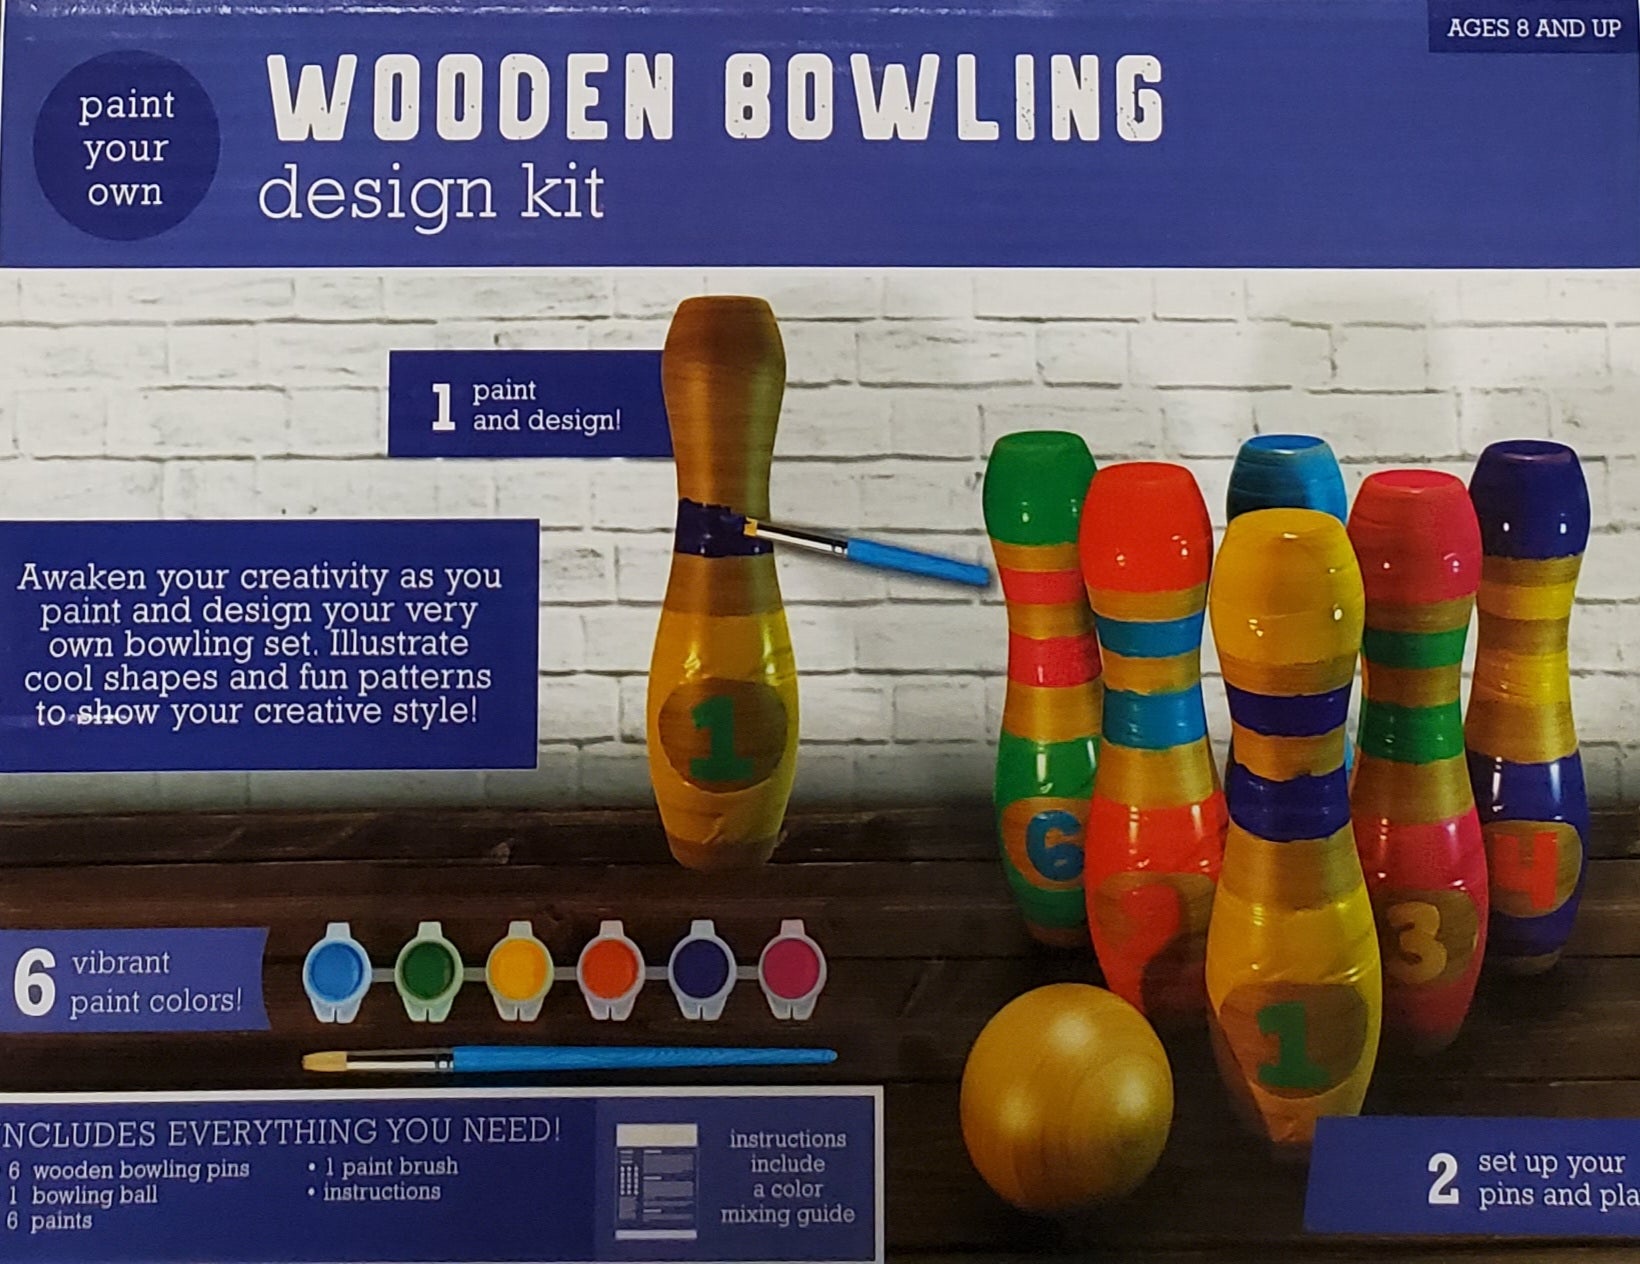 Wooden Bowling Set - With Paint Design Kit